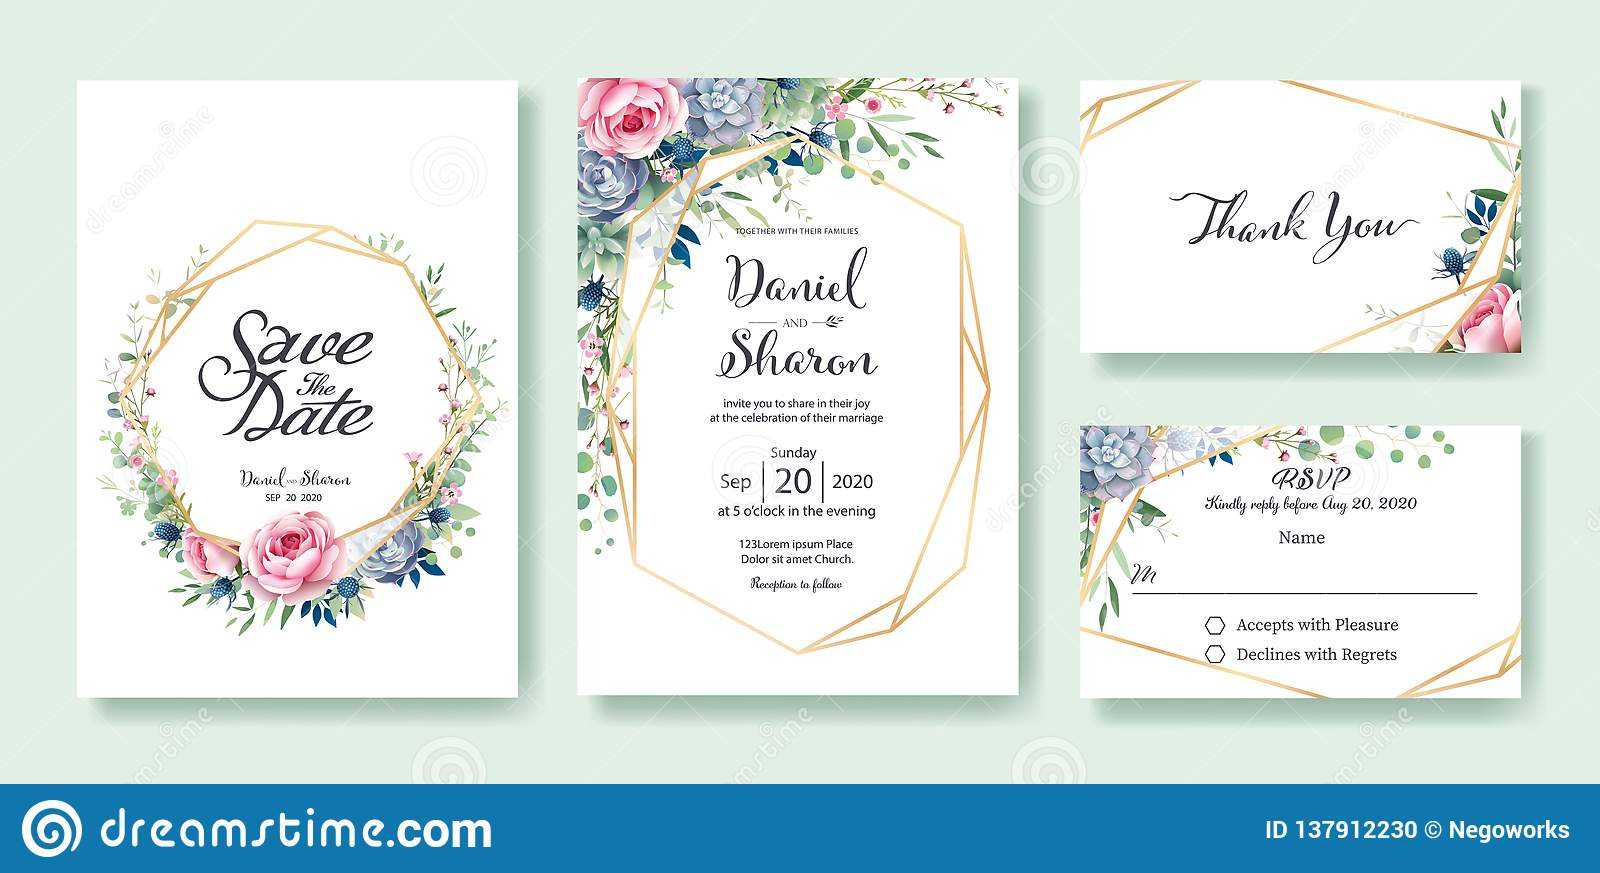 Wedding Invitation, Save The Date, Thank You, Rsvp Card In Template For Rsvp Cards For Wedding